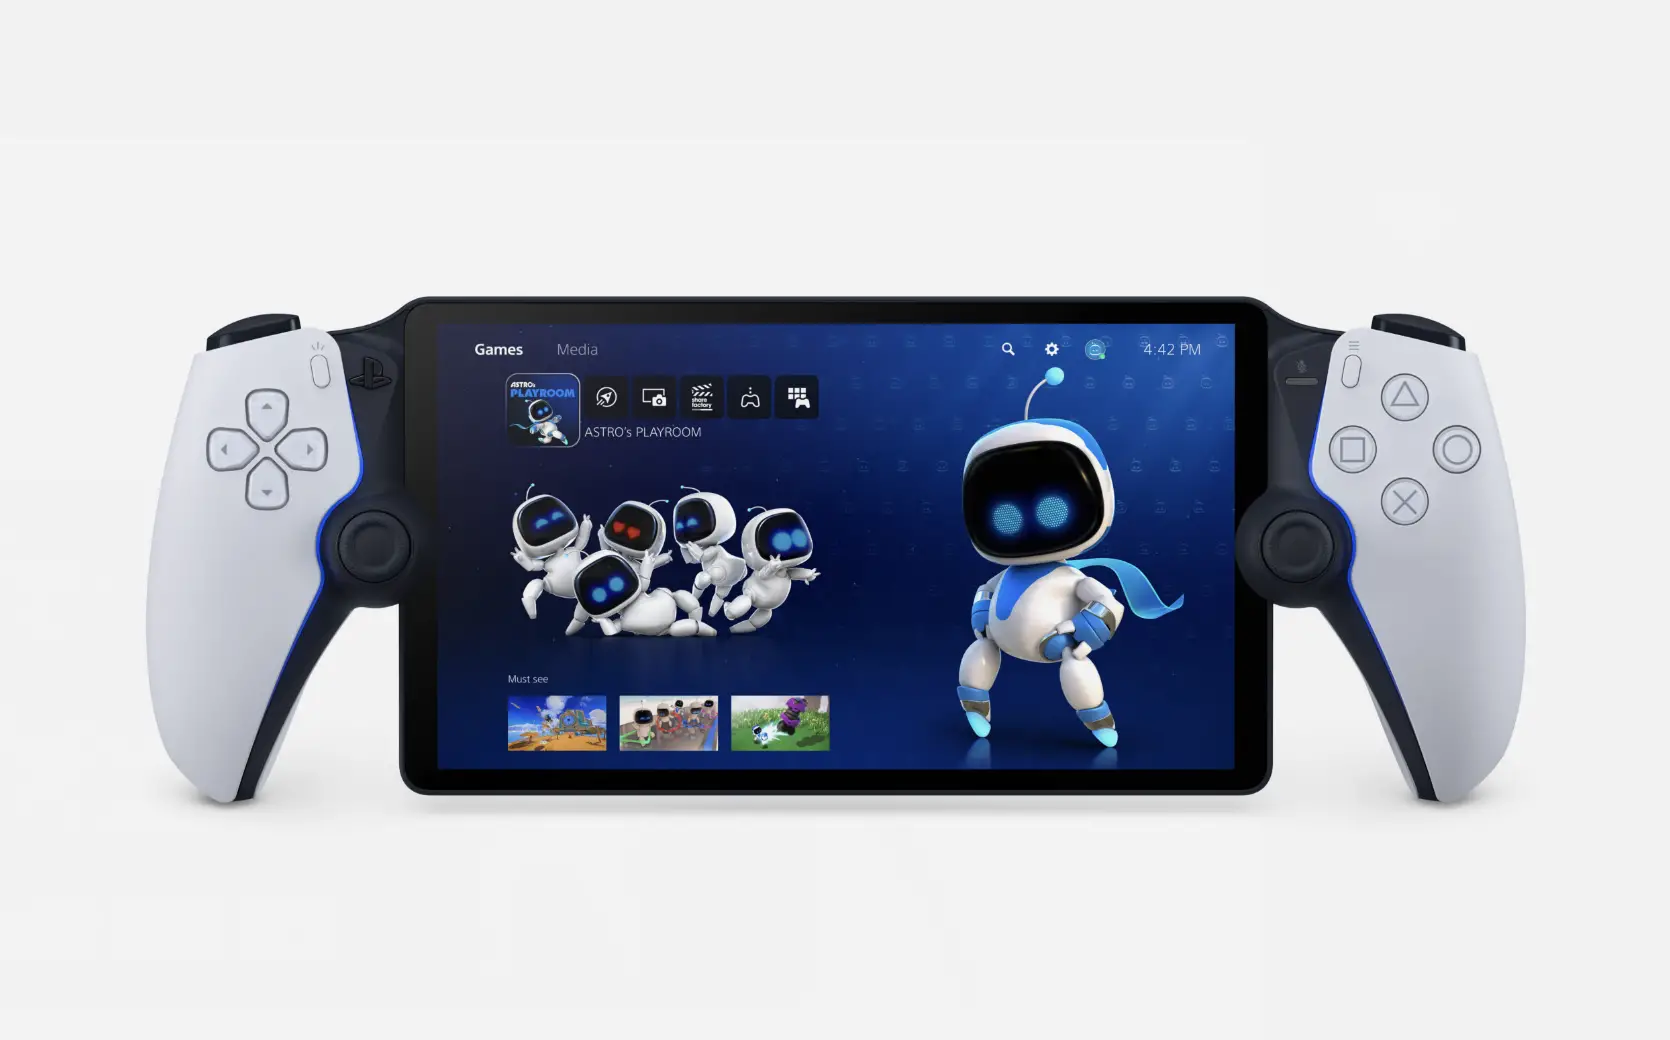 Sony's New PSP is Finally Official - Phandroid